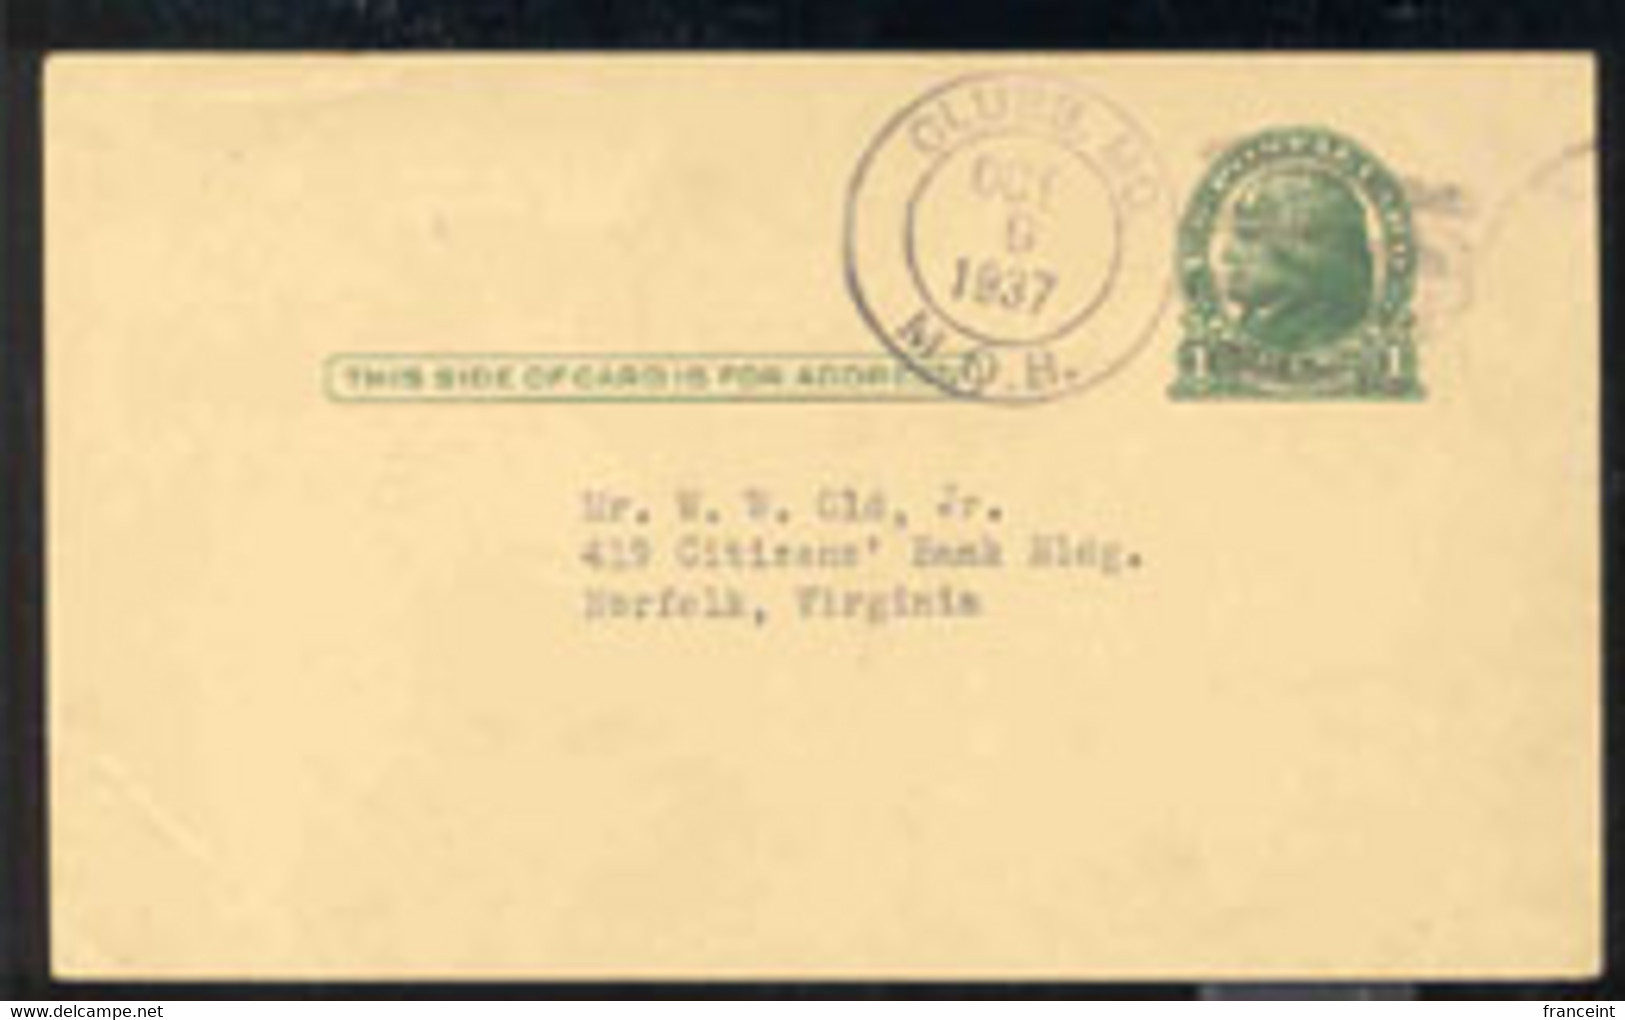 U.S.A. (1937) Clubs. Circulaire Date Cancel From Clubb, Missouri On Postal Card. - 1921-40